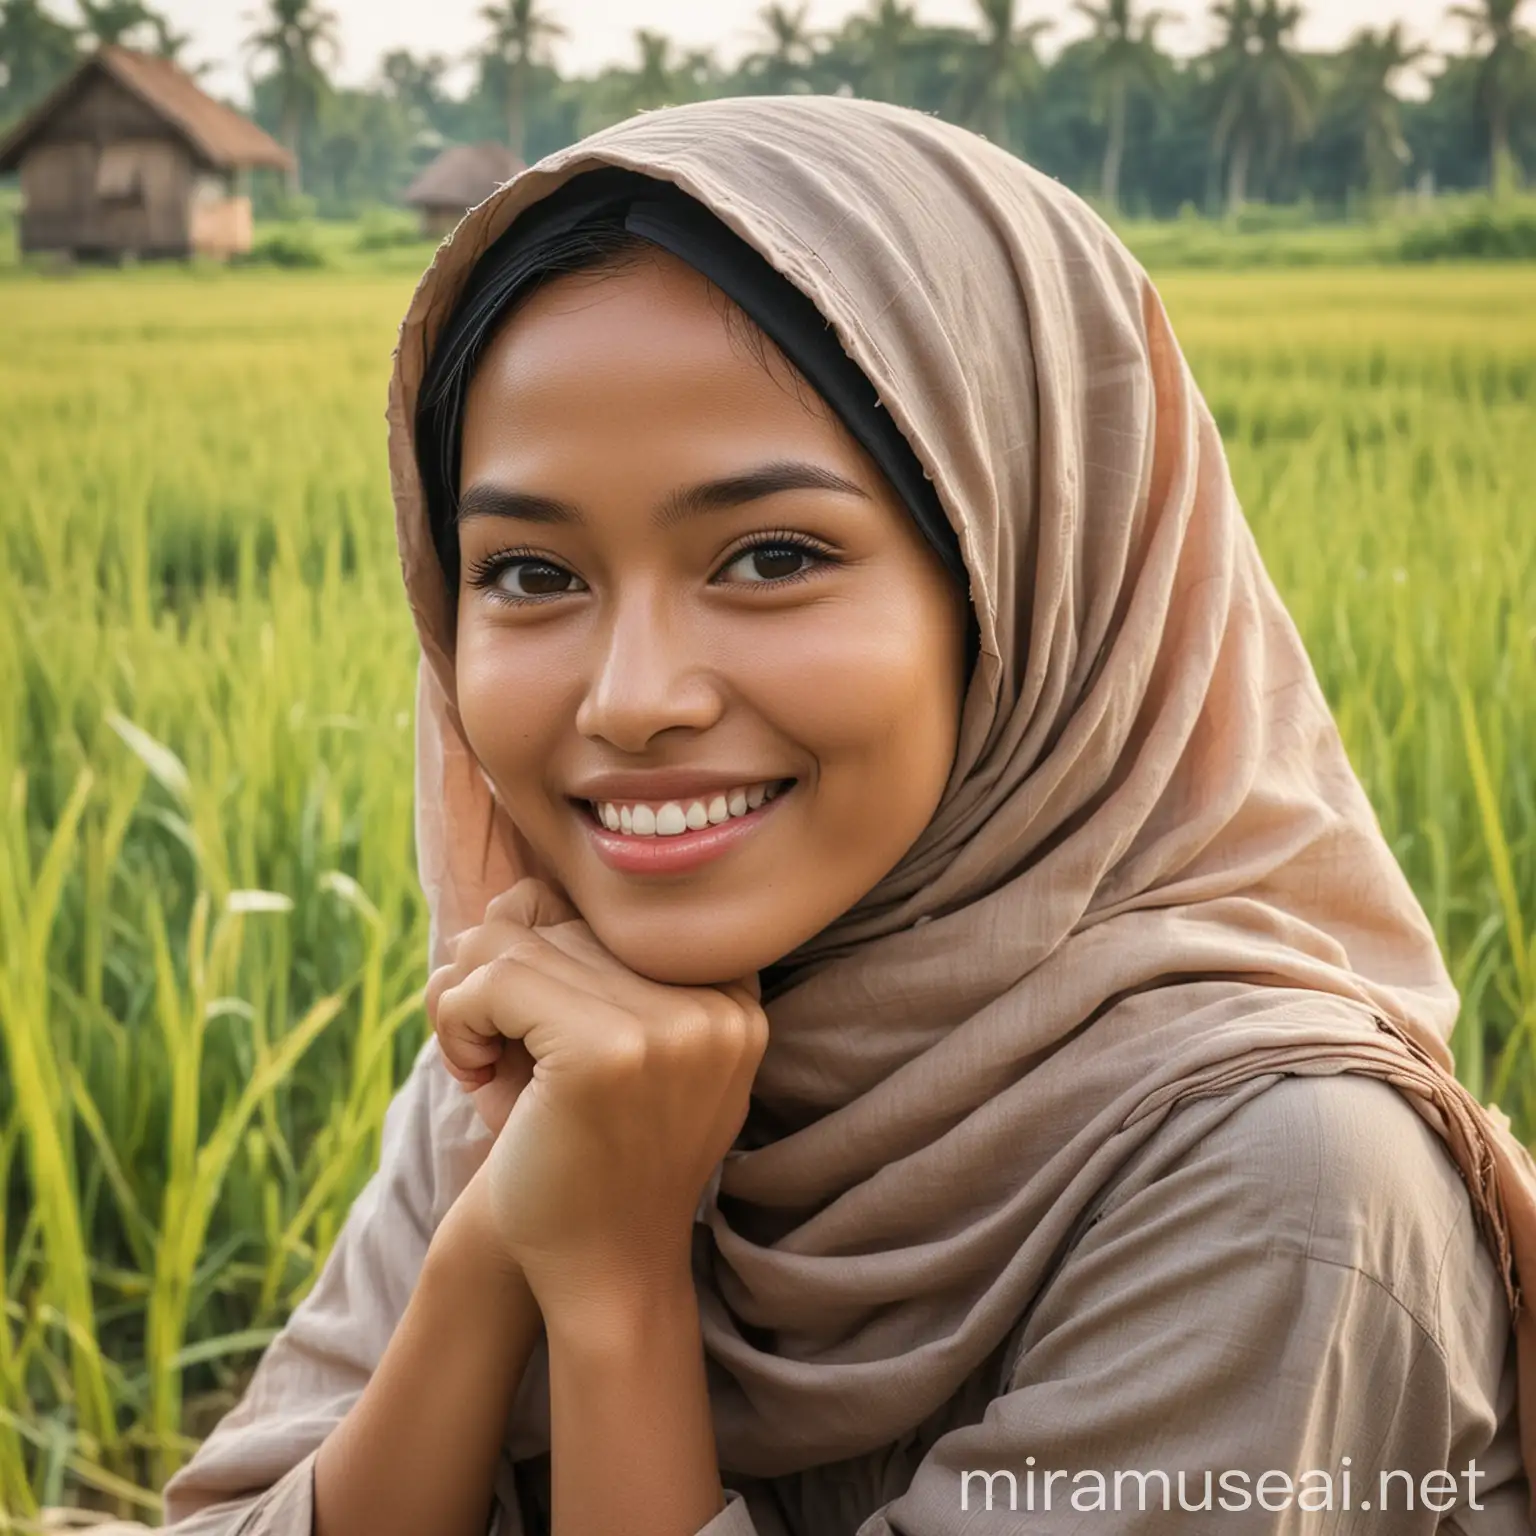 Smiling Indonesian Woman in Rural Setting Dreaming of Family Reunion